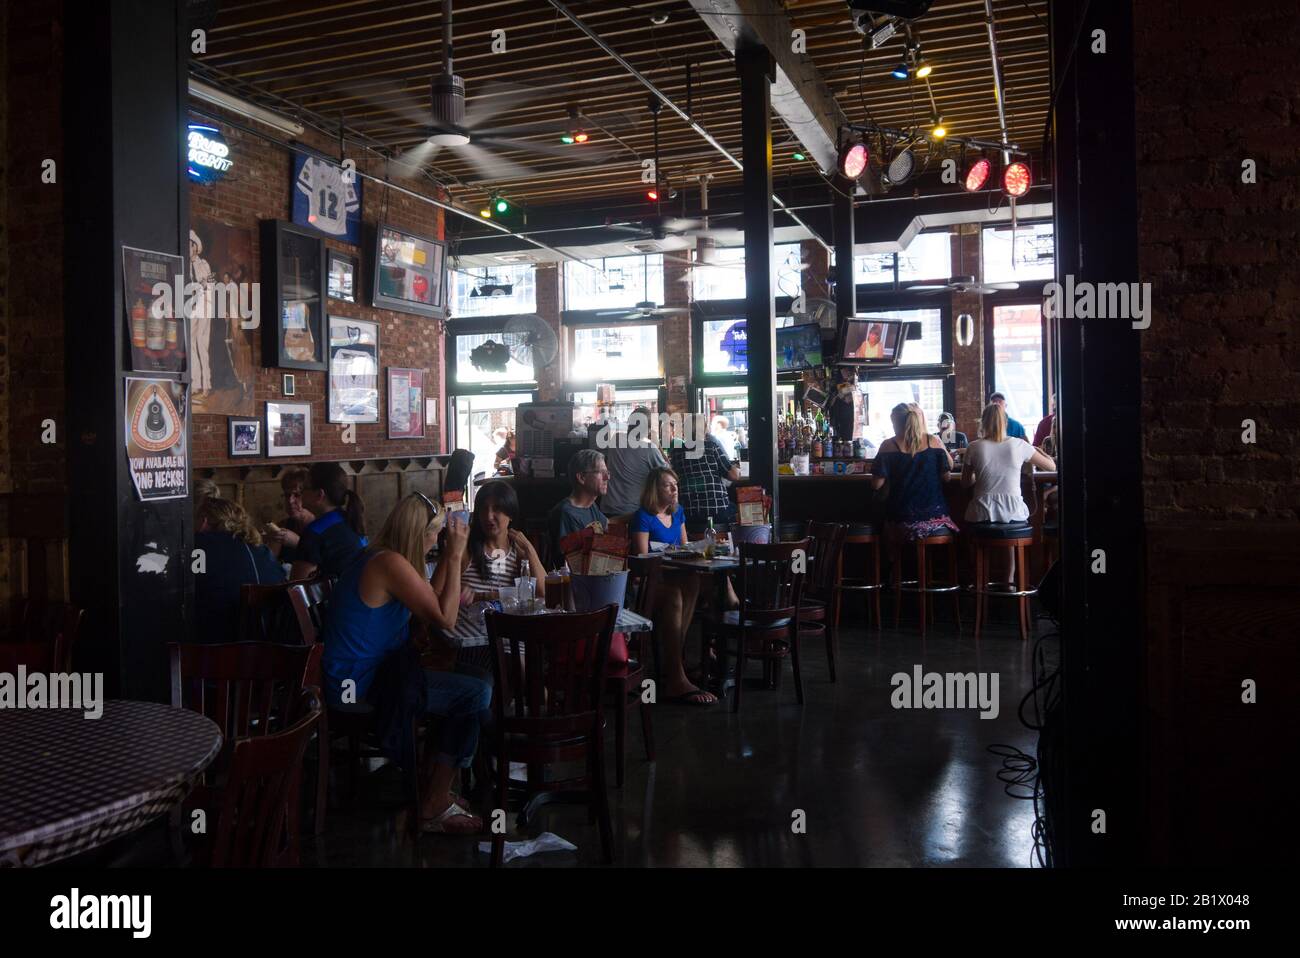 Crowd of people in a restaurant in downtown Nashville, Tennessee Stock Photo